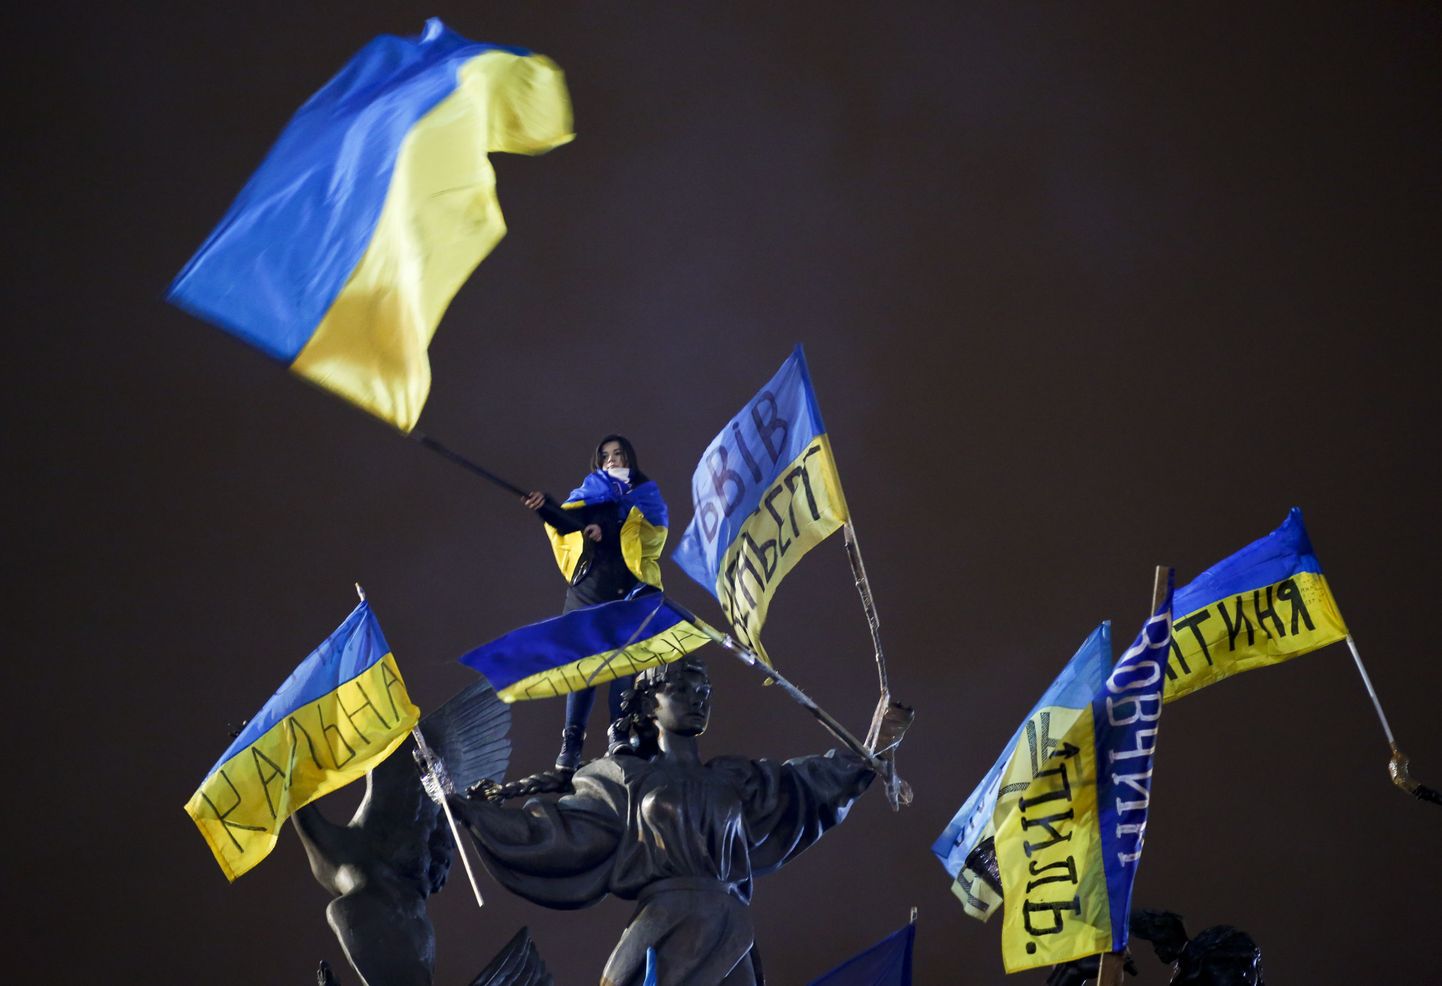 A Pro-European integration protester waves a Ukrainian national flag as she stands on a statue during a mass rally at Independence Square in Kiev December 15, 2013. Thousands massed on Sunday for a rally against President Viktor Yanukovich just days before he heads for a meeting at the Kremlin which the opposition fears will slam the door on integration with the European mainstream.   REUTERS/Marko Djurica (UKRAINE  - Tags: POLITICS CIVIL UNREST)